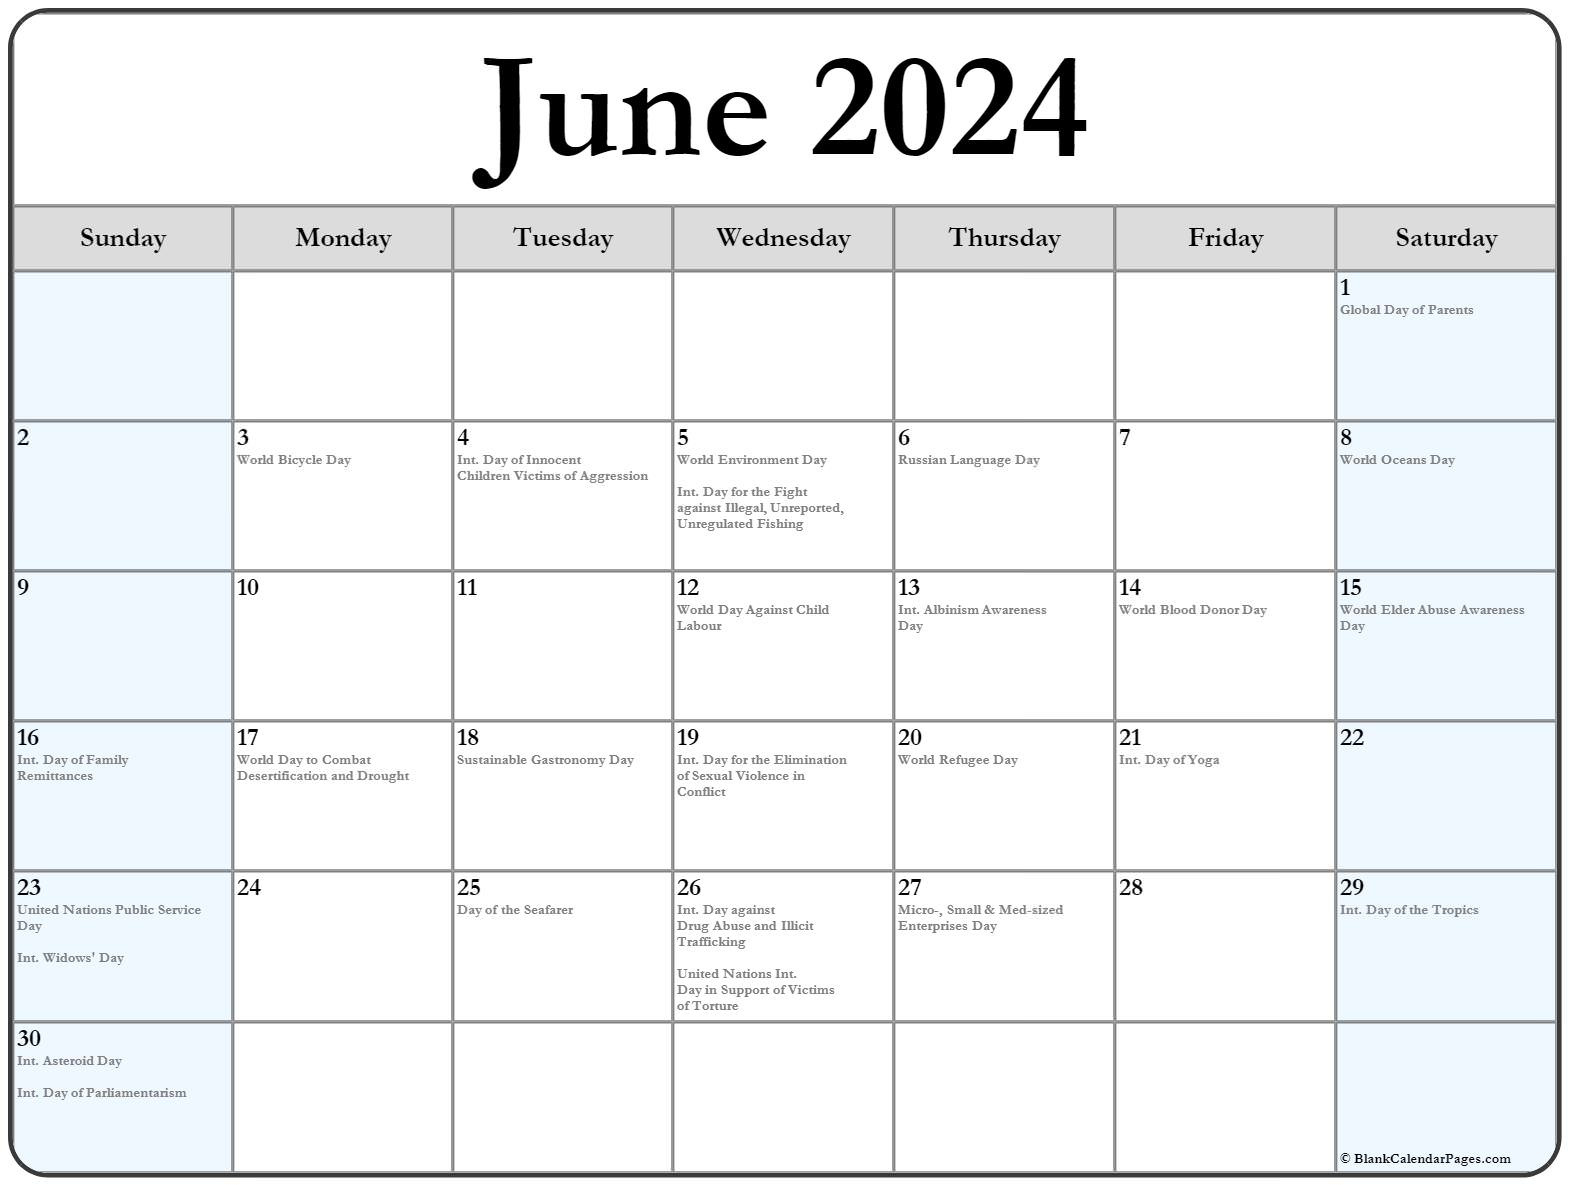 June 2024 With Holidays Calendar within Calendar Of Events For June 2024